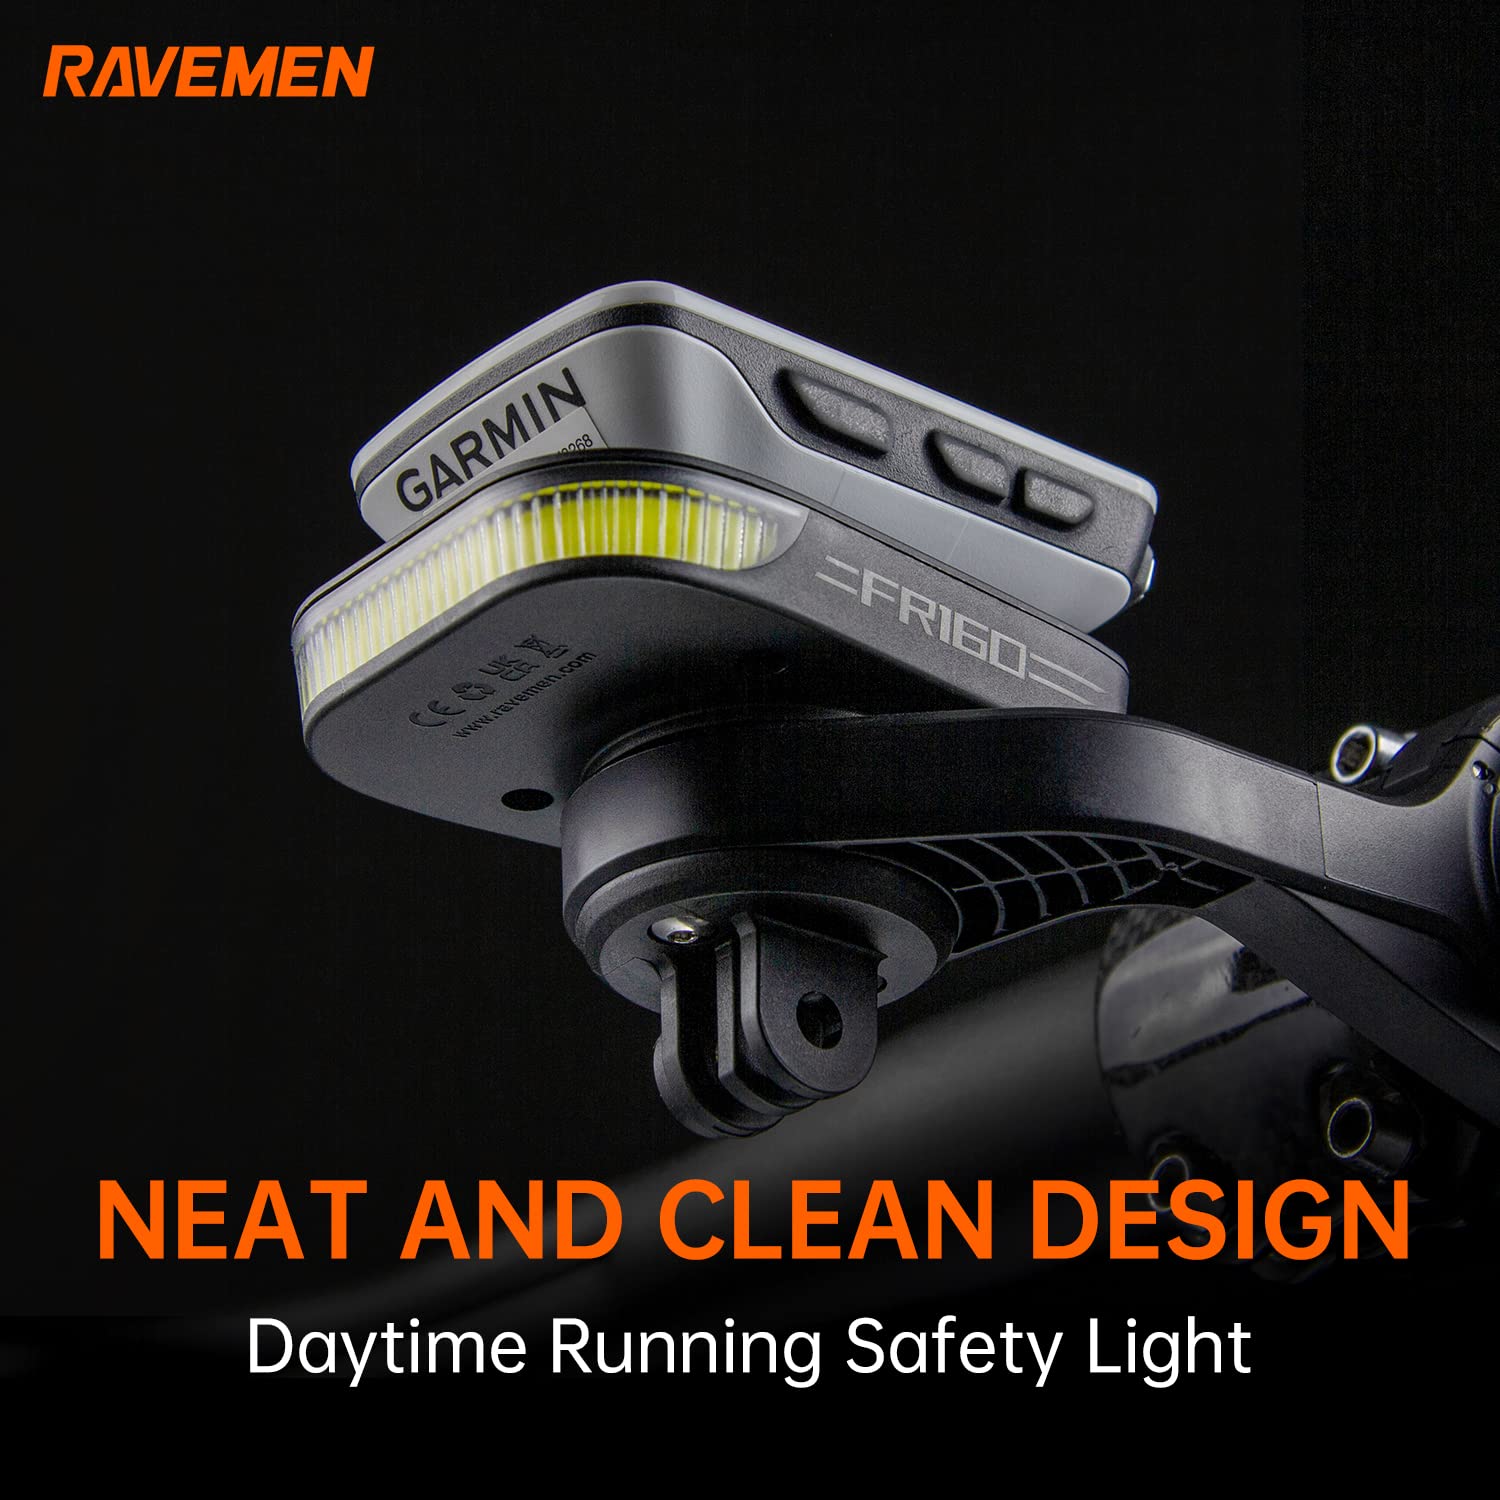 RAVEMEN FR160 Daylight Compatible with Garmin/Wahoo Bike Computer, IPX6 Waterproof Bike Light with Side Visibility Warning Flash Light 6 Light Modes for Riding Safety (Patent Protected)